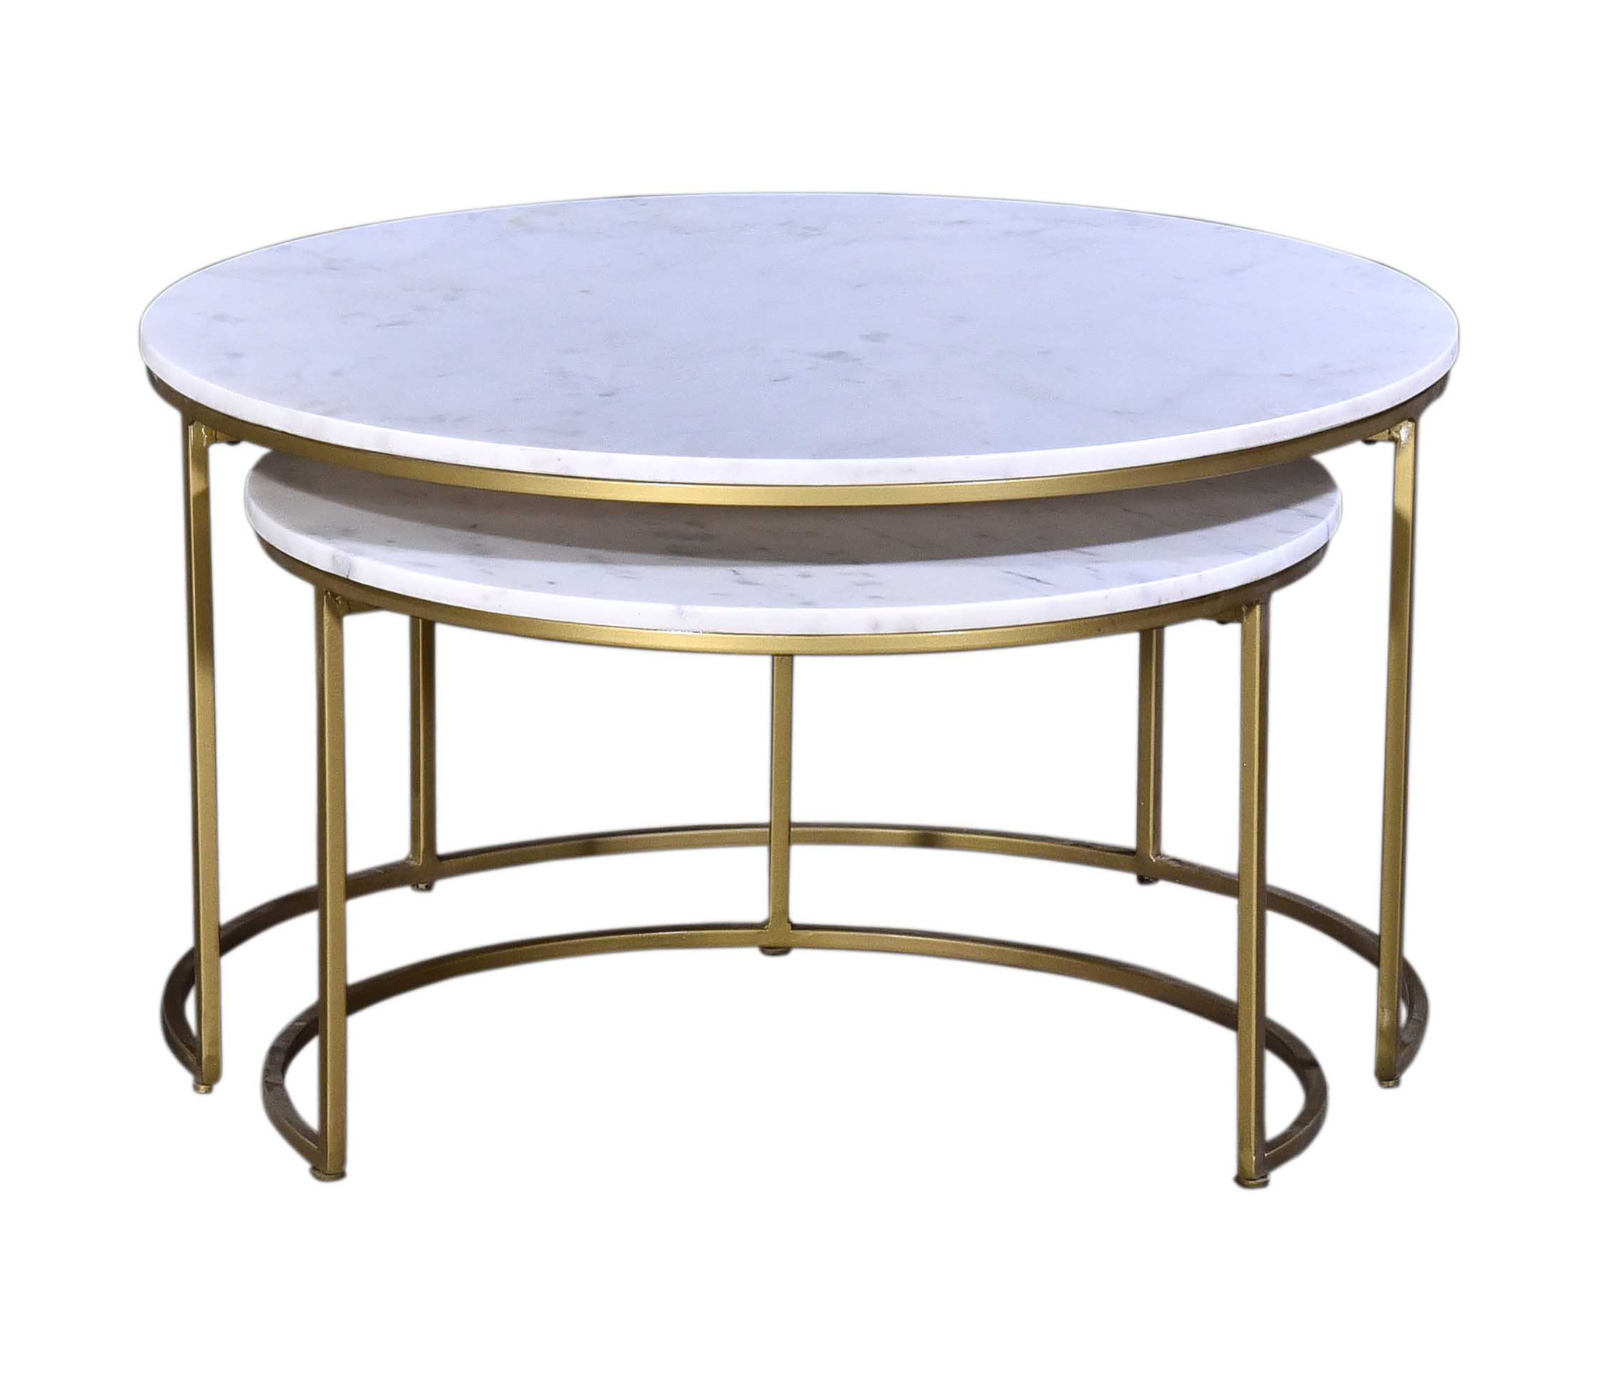 Delaney Nesting Coffee Table - White / Gold